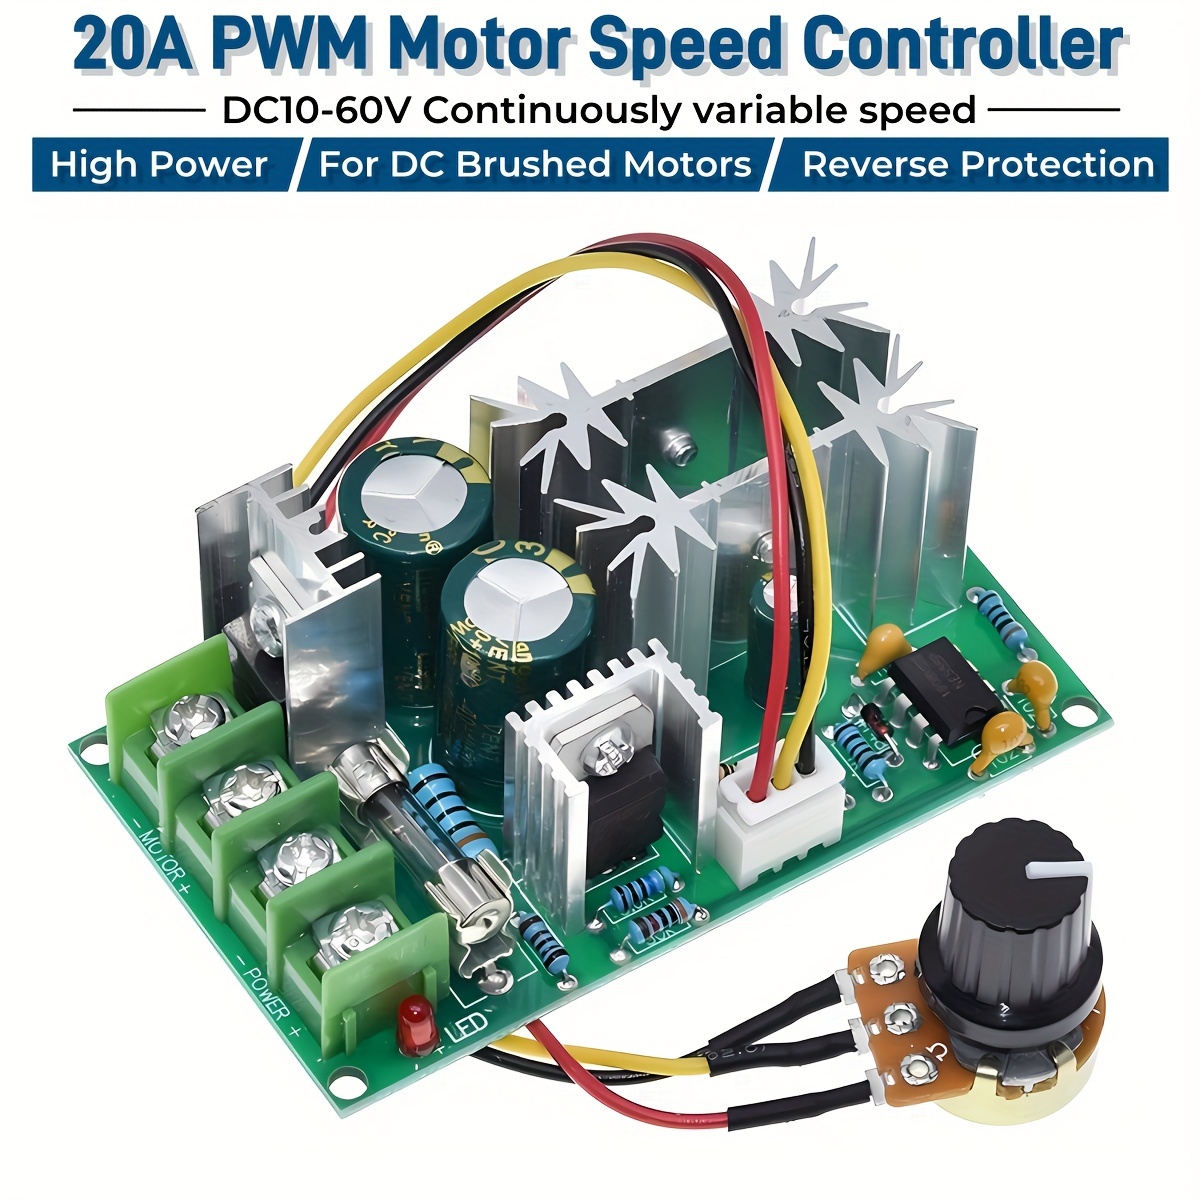 

High-power Dc Motor Speed Controller, 1200w (20a), Pwm Regulator With Fuse - Ideal For Brush Motors, Easy Potentiometer Control, Barrier Terminal Block